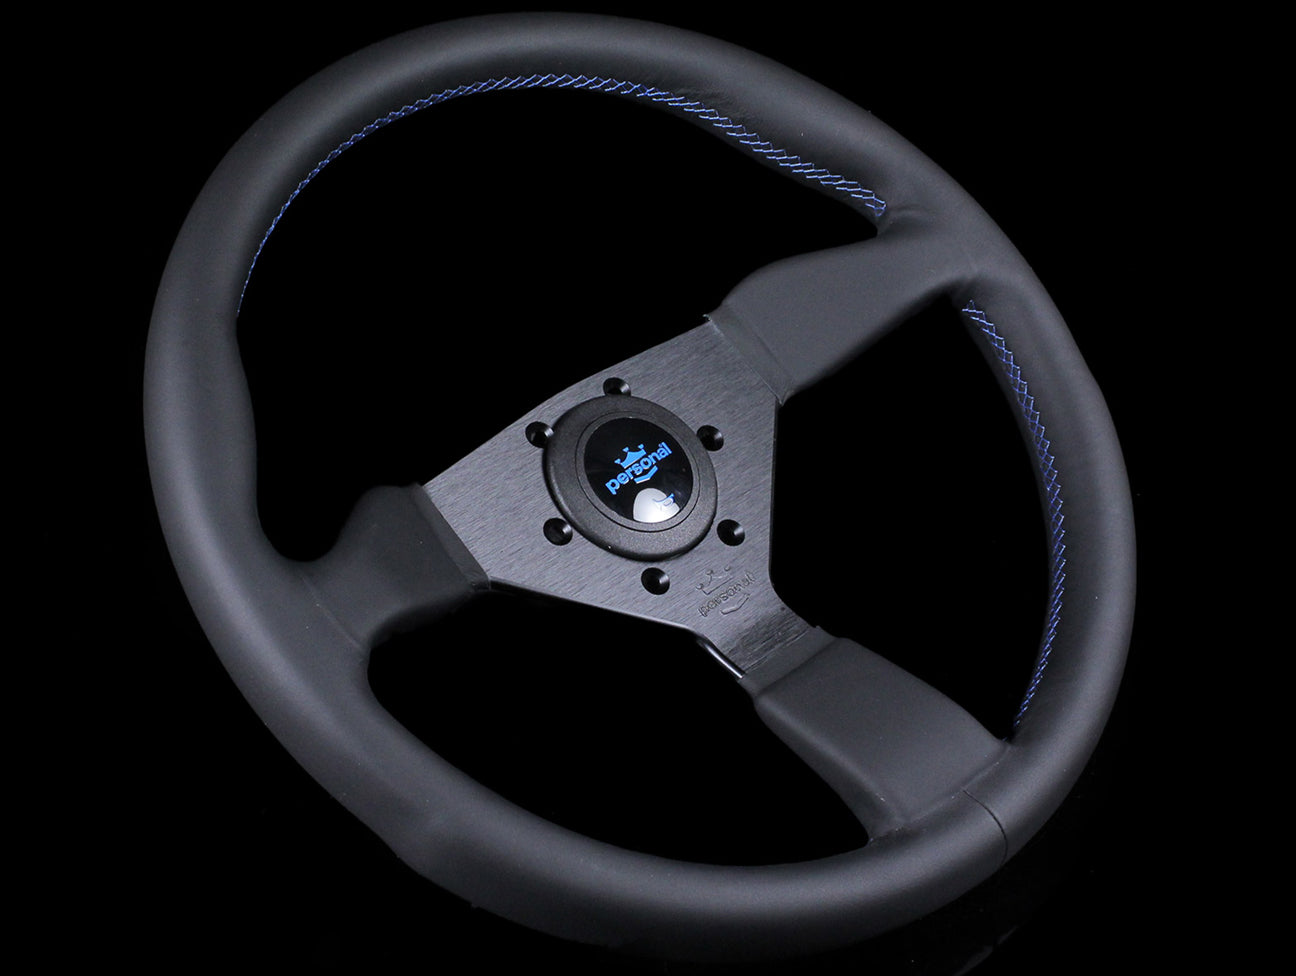 Personal Neo Grinta 350mm Steering Wheel - Black Leather / Blue Stitch